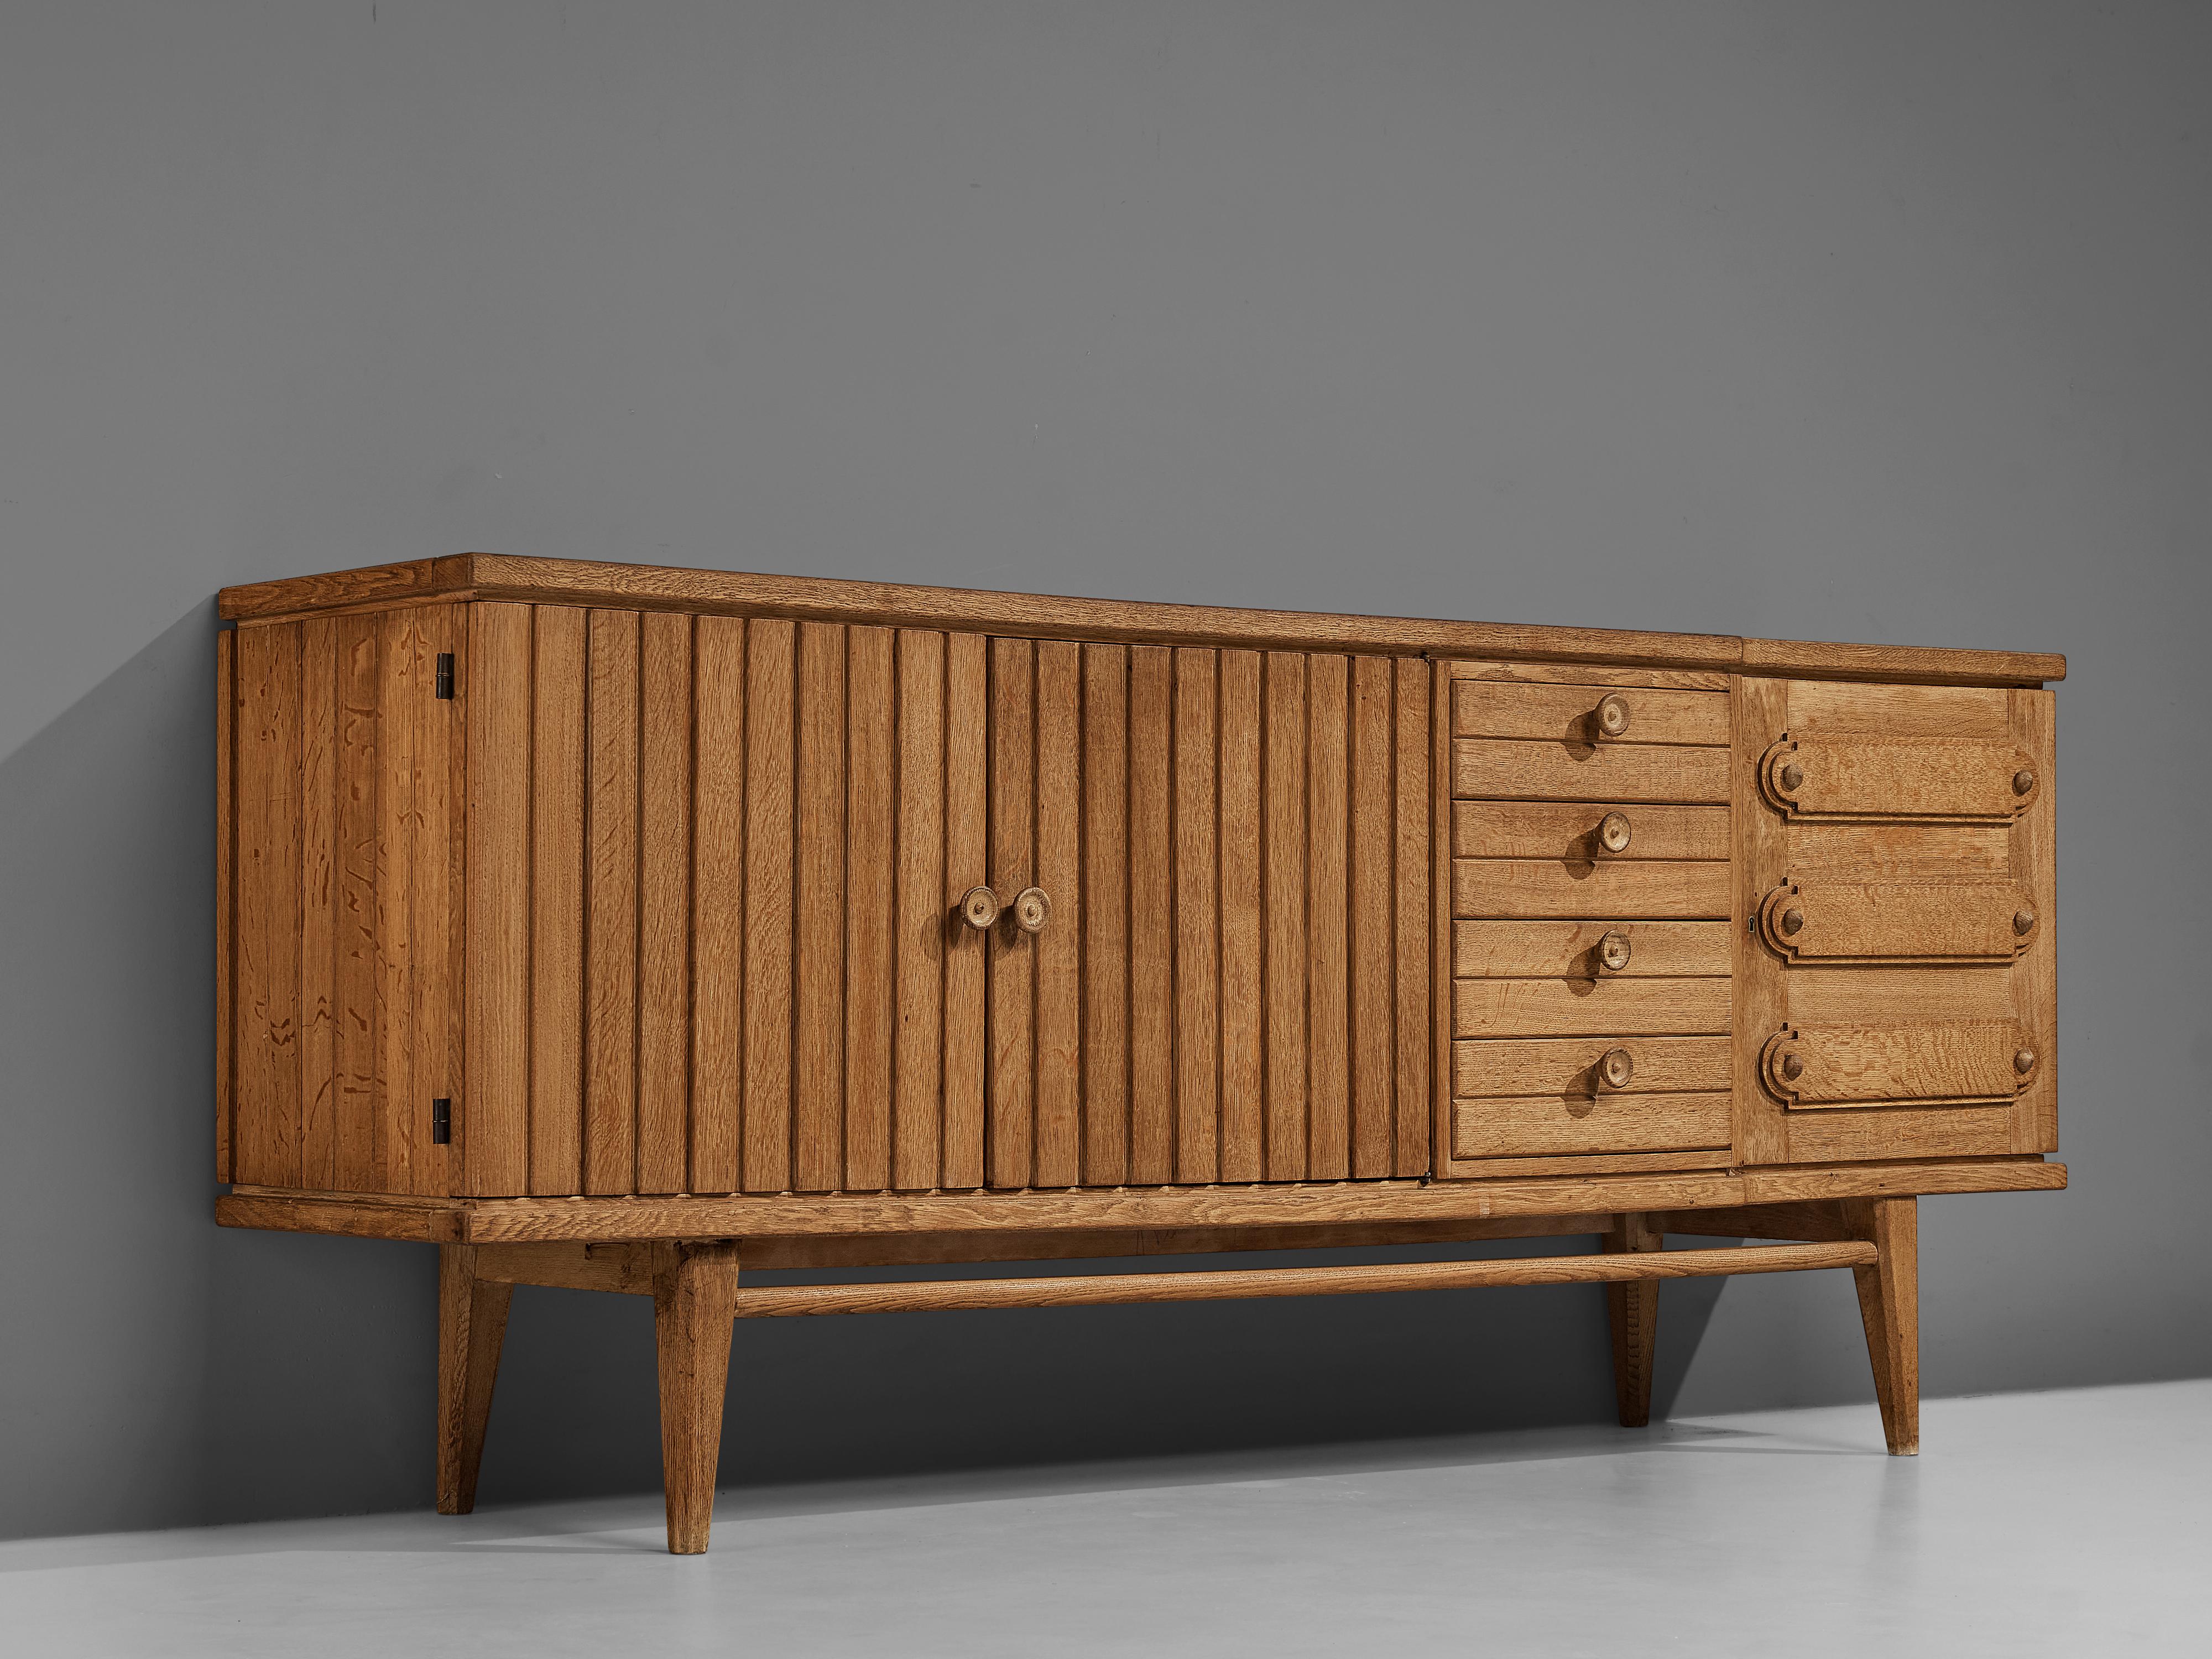 French sideboard, oak, France, 1960s

With the vividly designed fronts and the functional and versatile storage facilities this high-quality sideboard serves both visual and practical aspects. A section of drawers is flanked by one door with